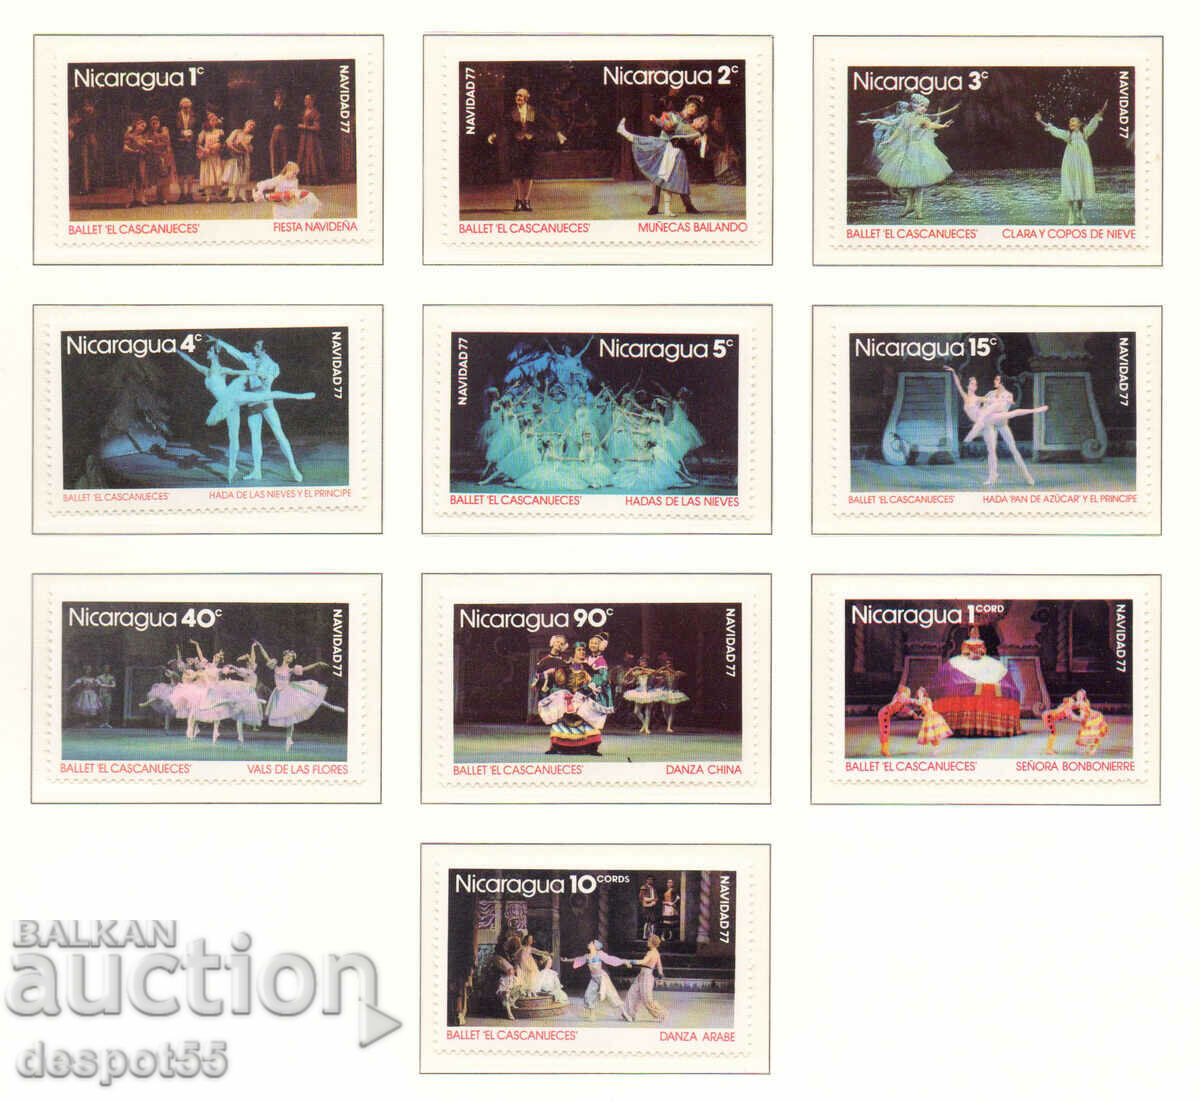 1977 Nicaragua. Christmas - Scenes from the ballet "The Nutcracker"